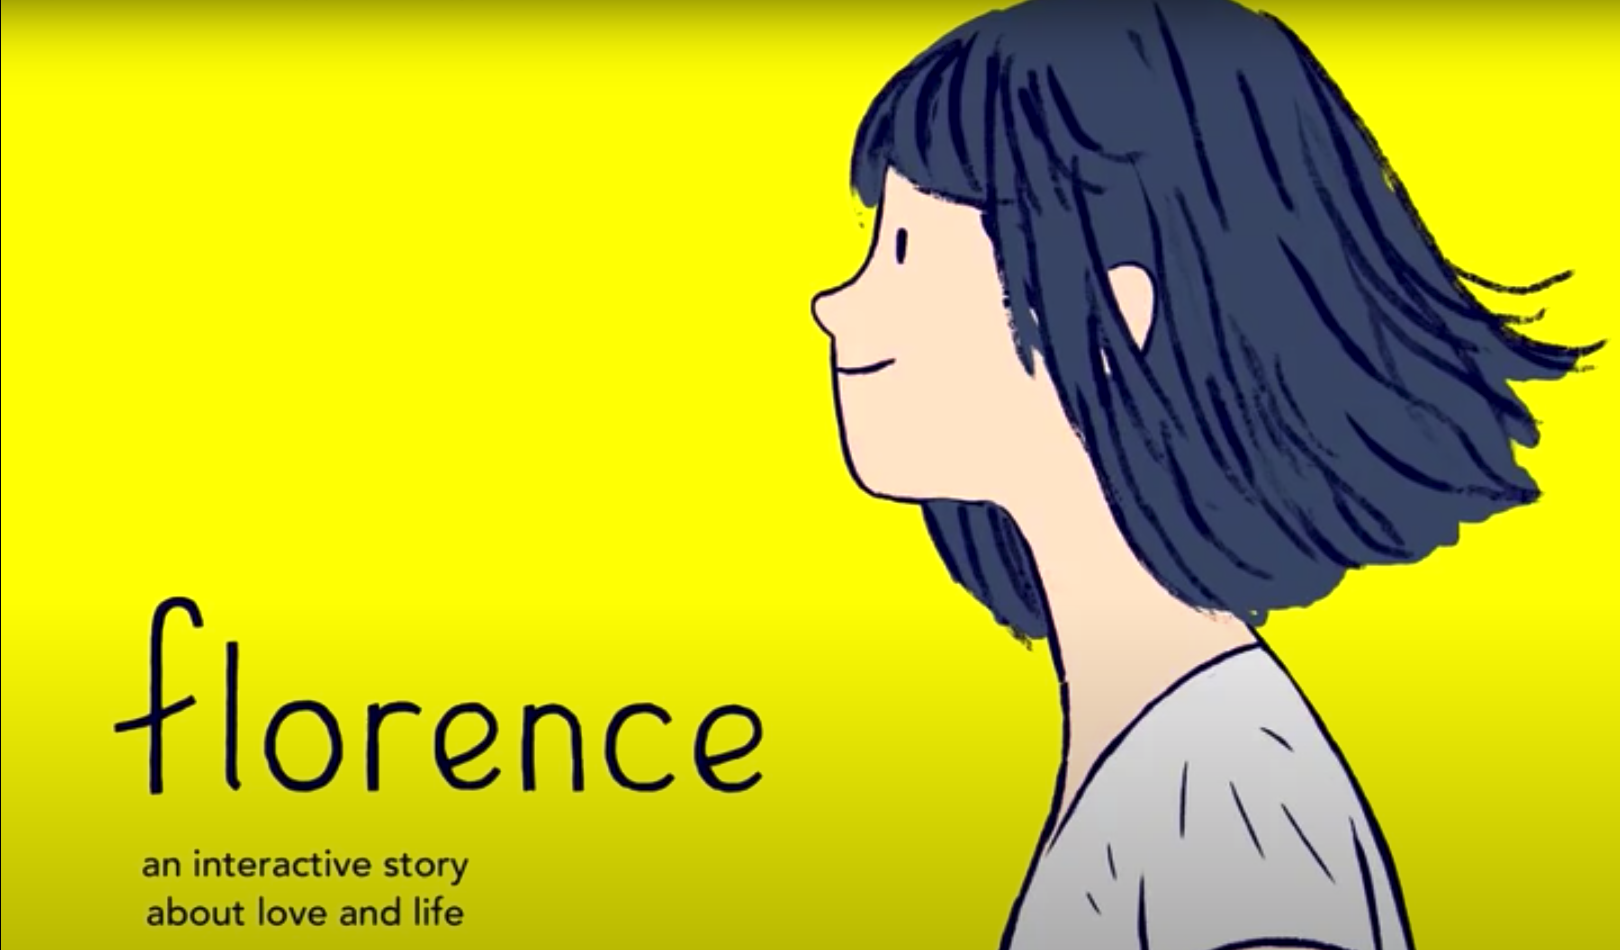 Drawing of a young girl against a yellow background with the caption "Florence. An interactive love story"